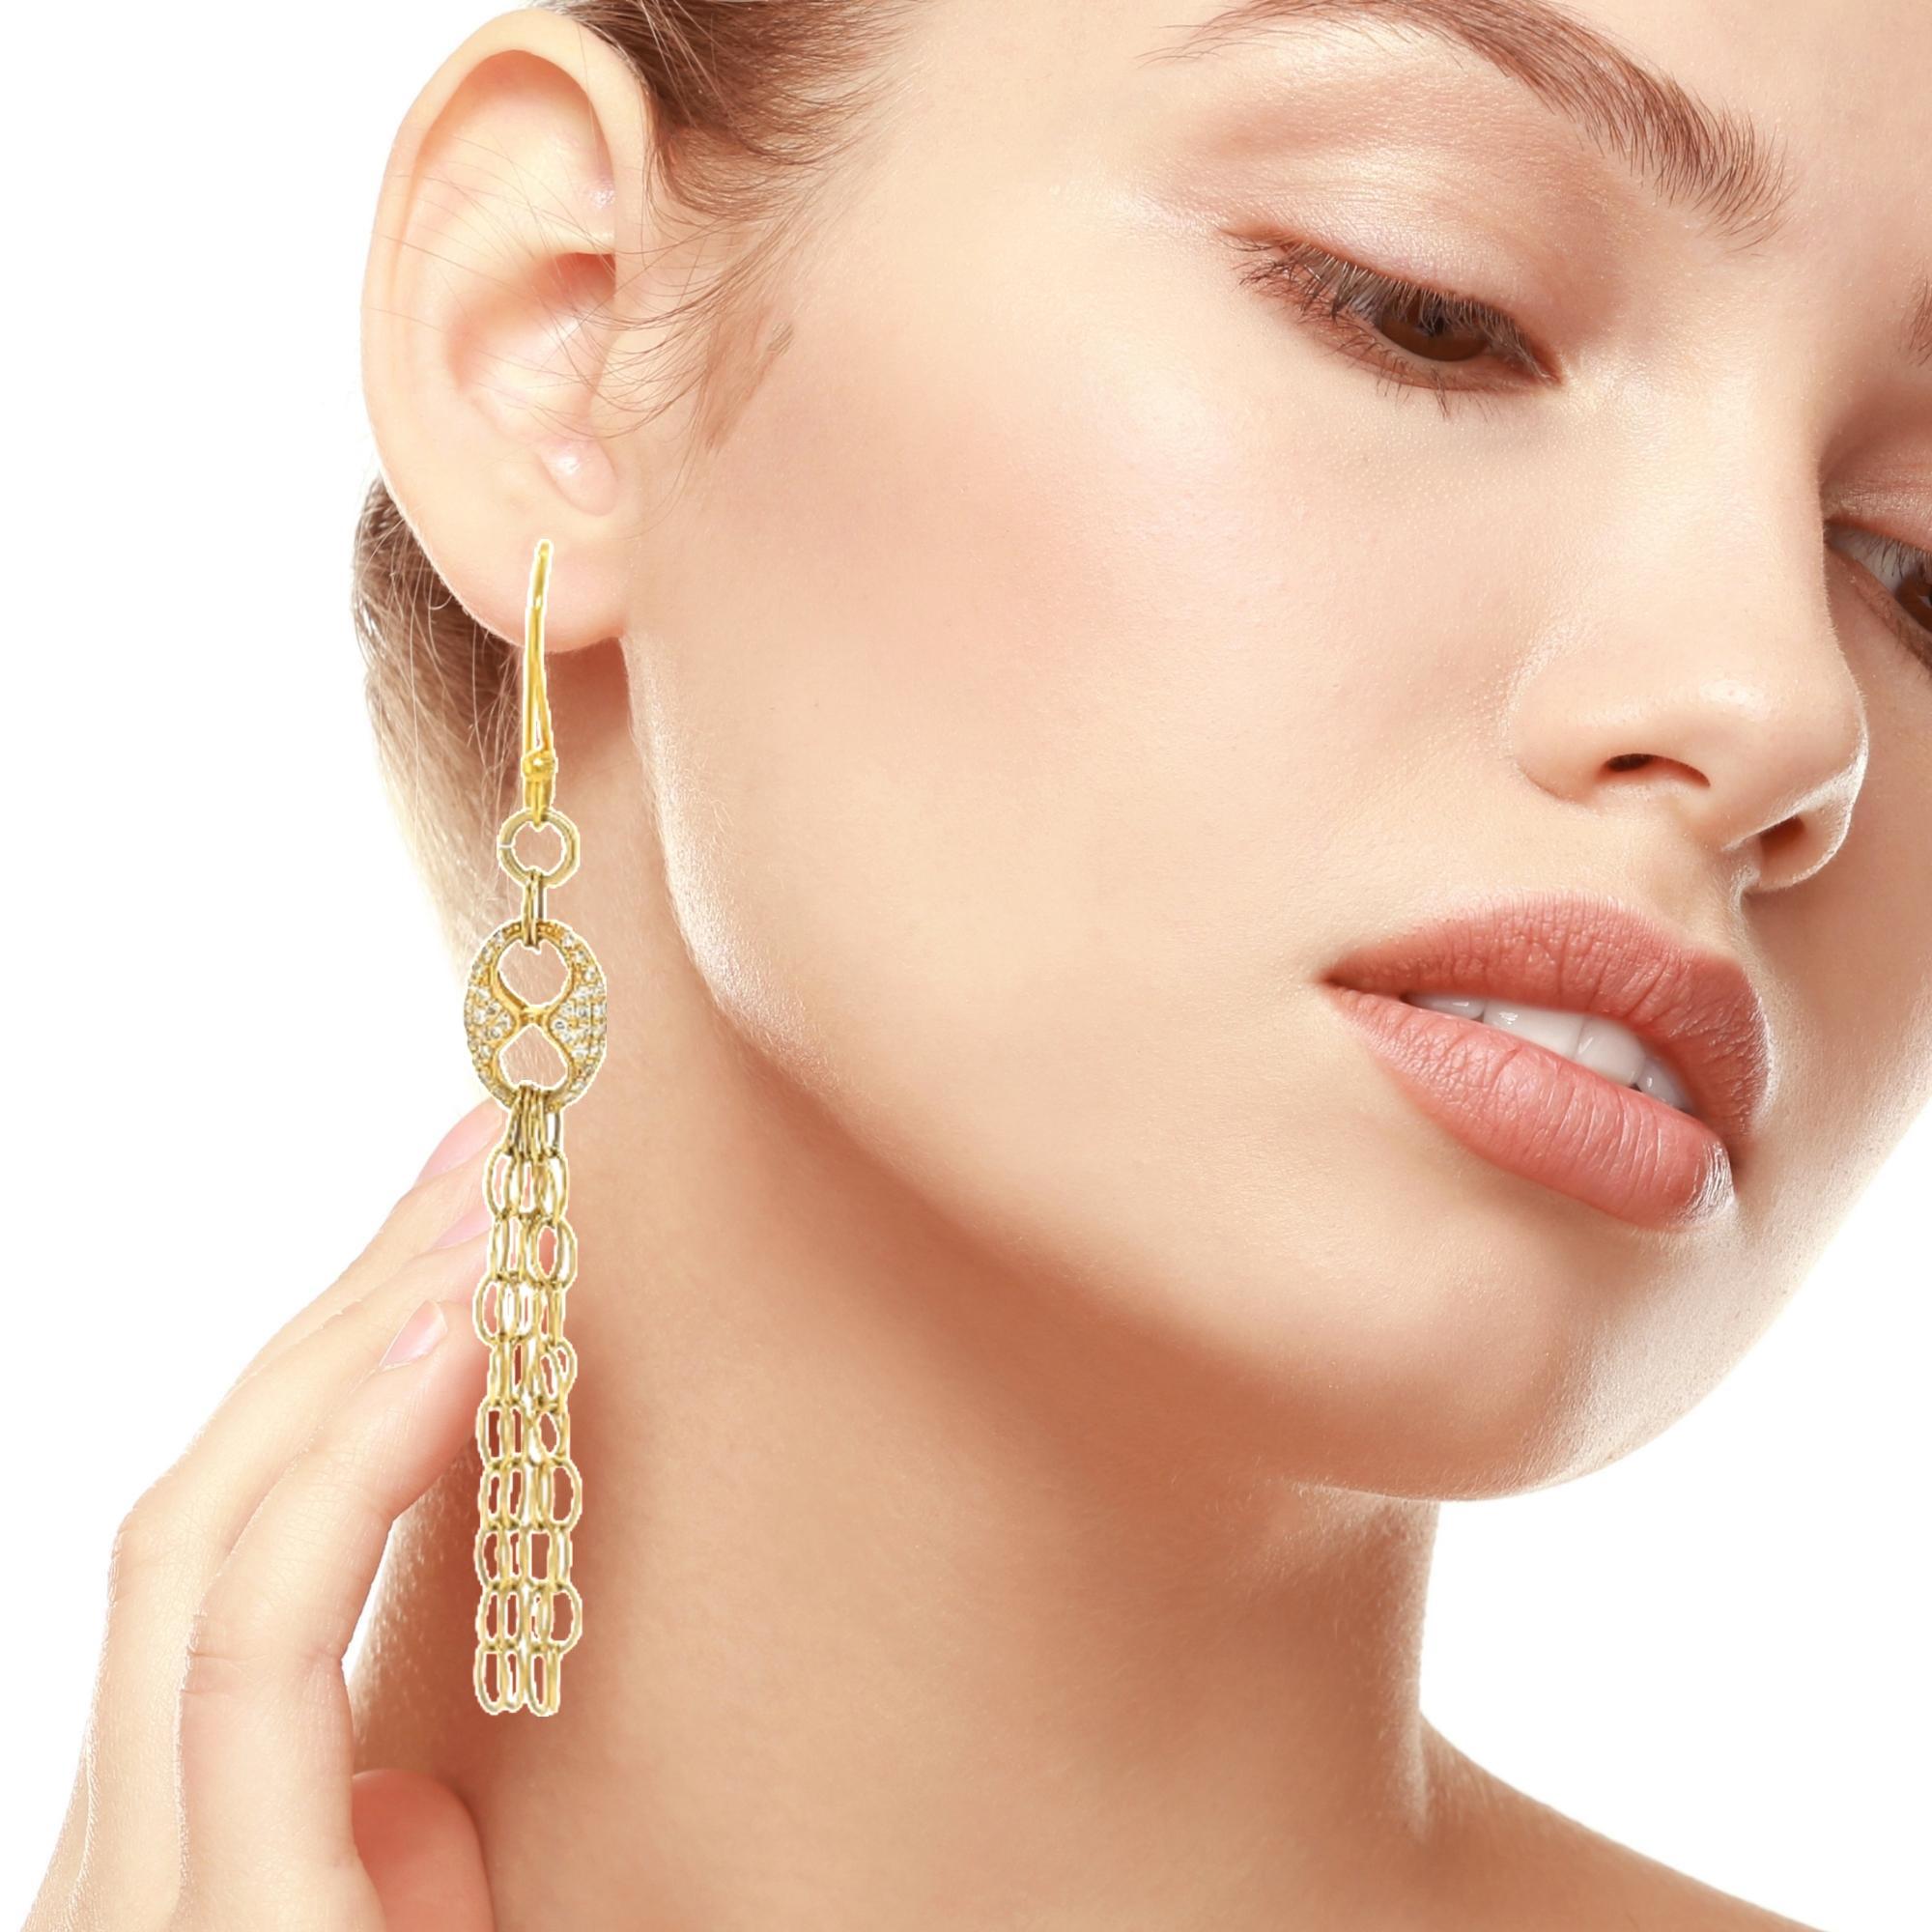 These delicate and stunning diamond earrings are perfect for that special dinner or event. They can be worn with your casual jeans or cocktail dress. They have 80 round diamonds all set in 18karat yellow gold. They have a fish hook closure for easy